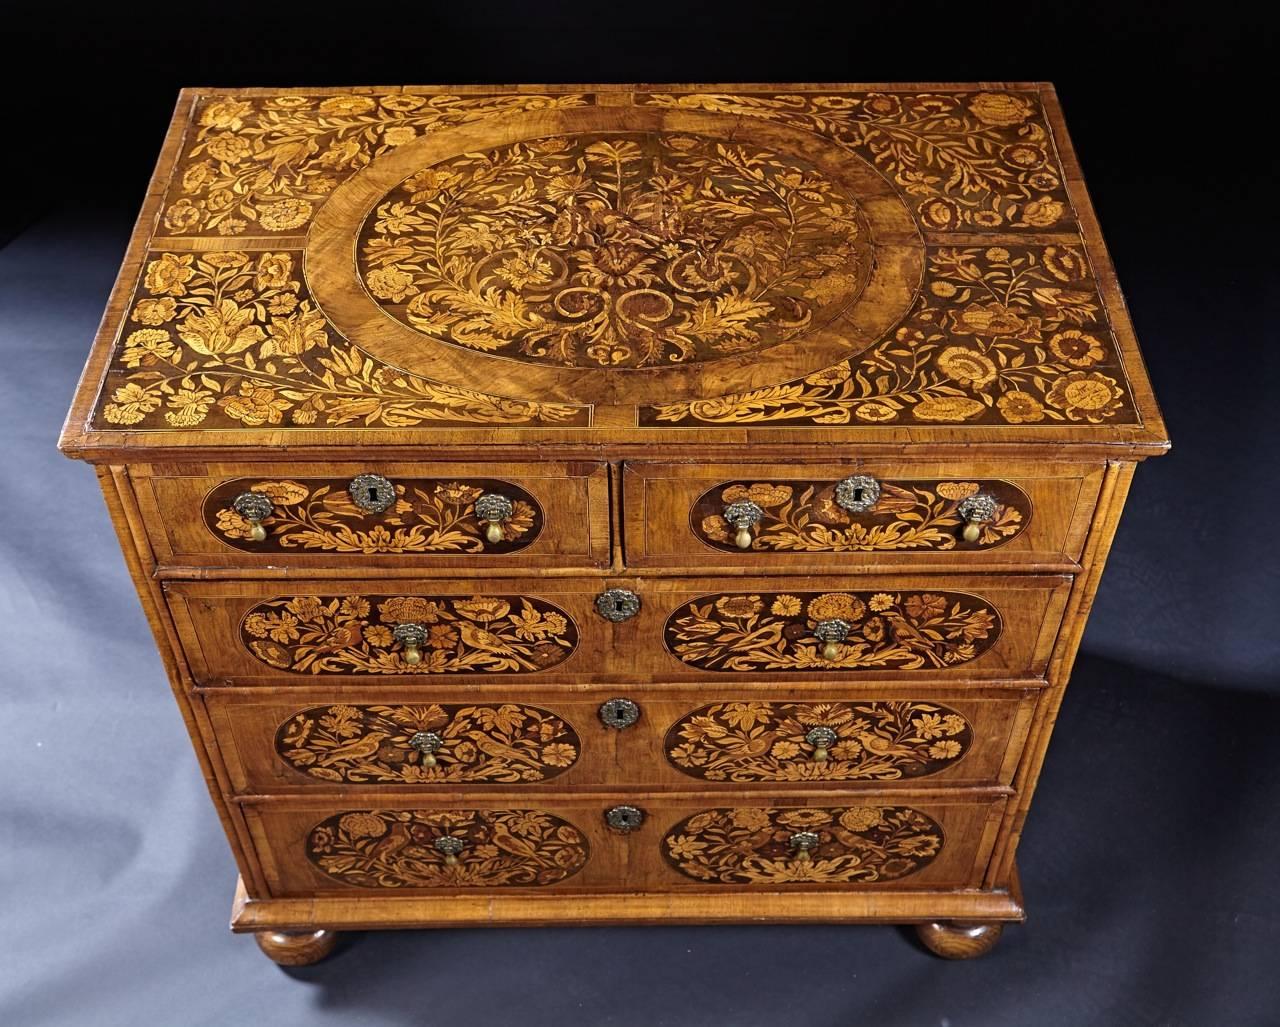 William and Mary Fine English Walnut Marquetry Inlaid Chest with Provenance, circa 1680-1710 For Sale